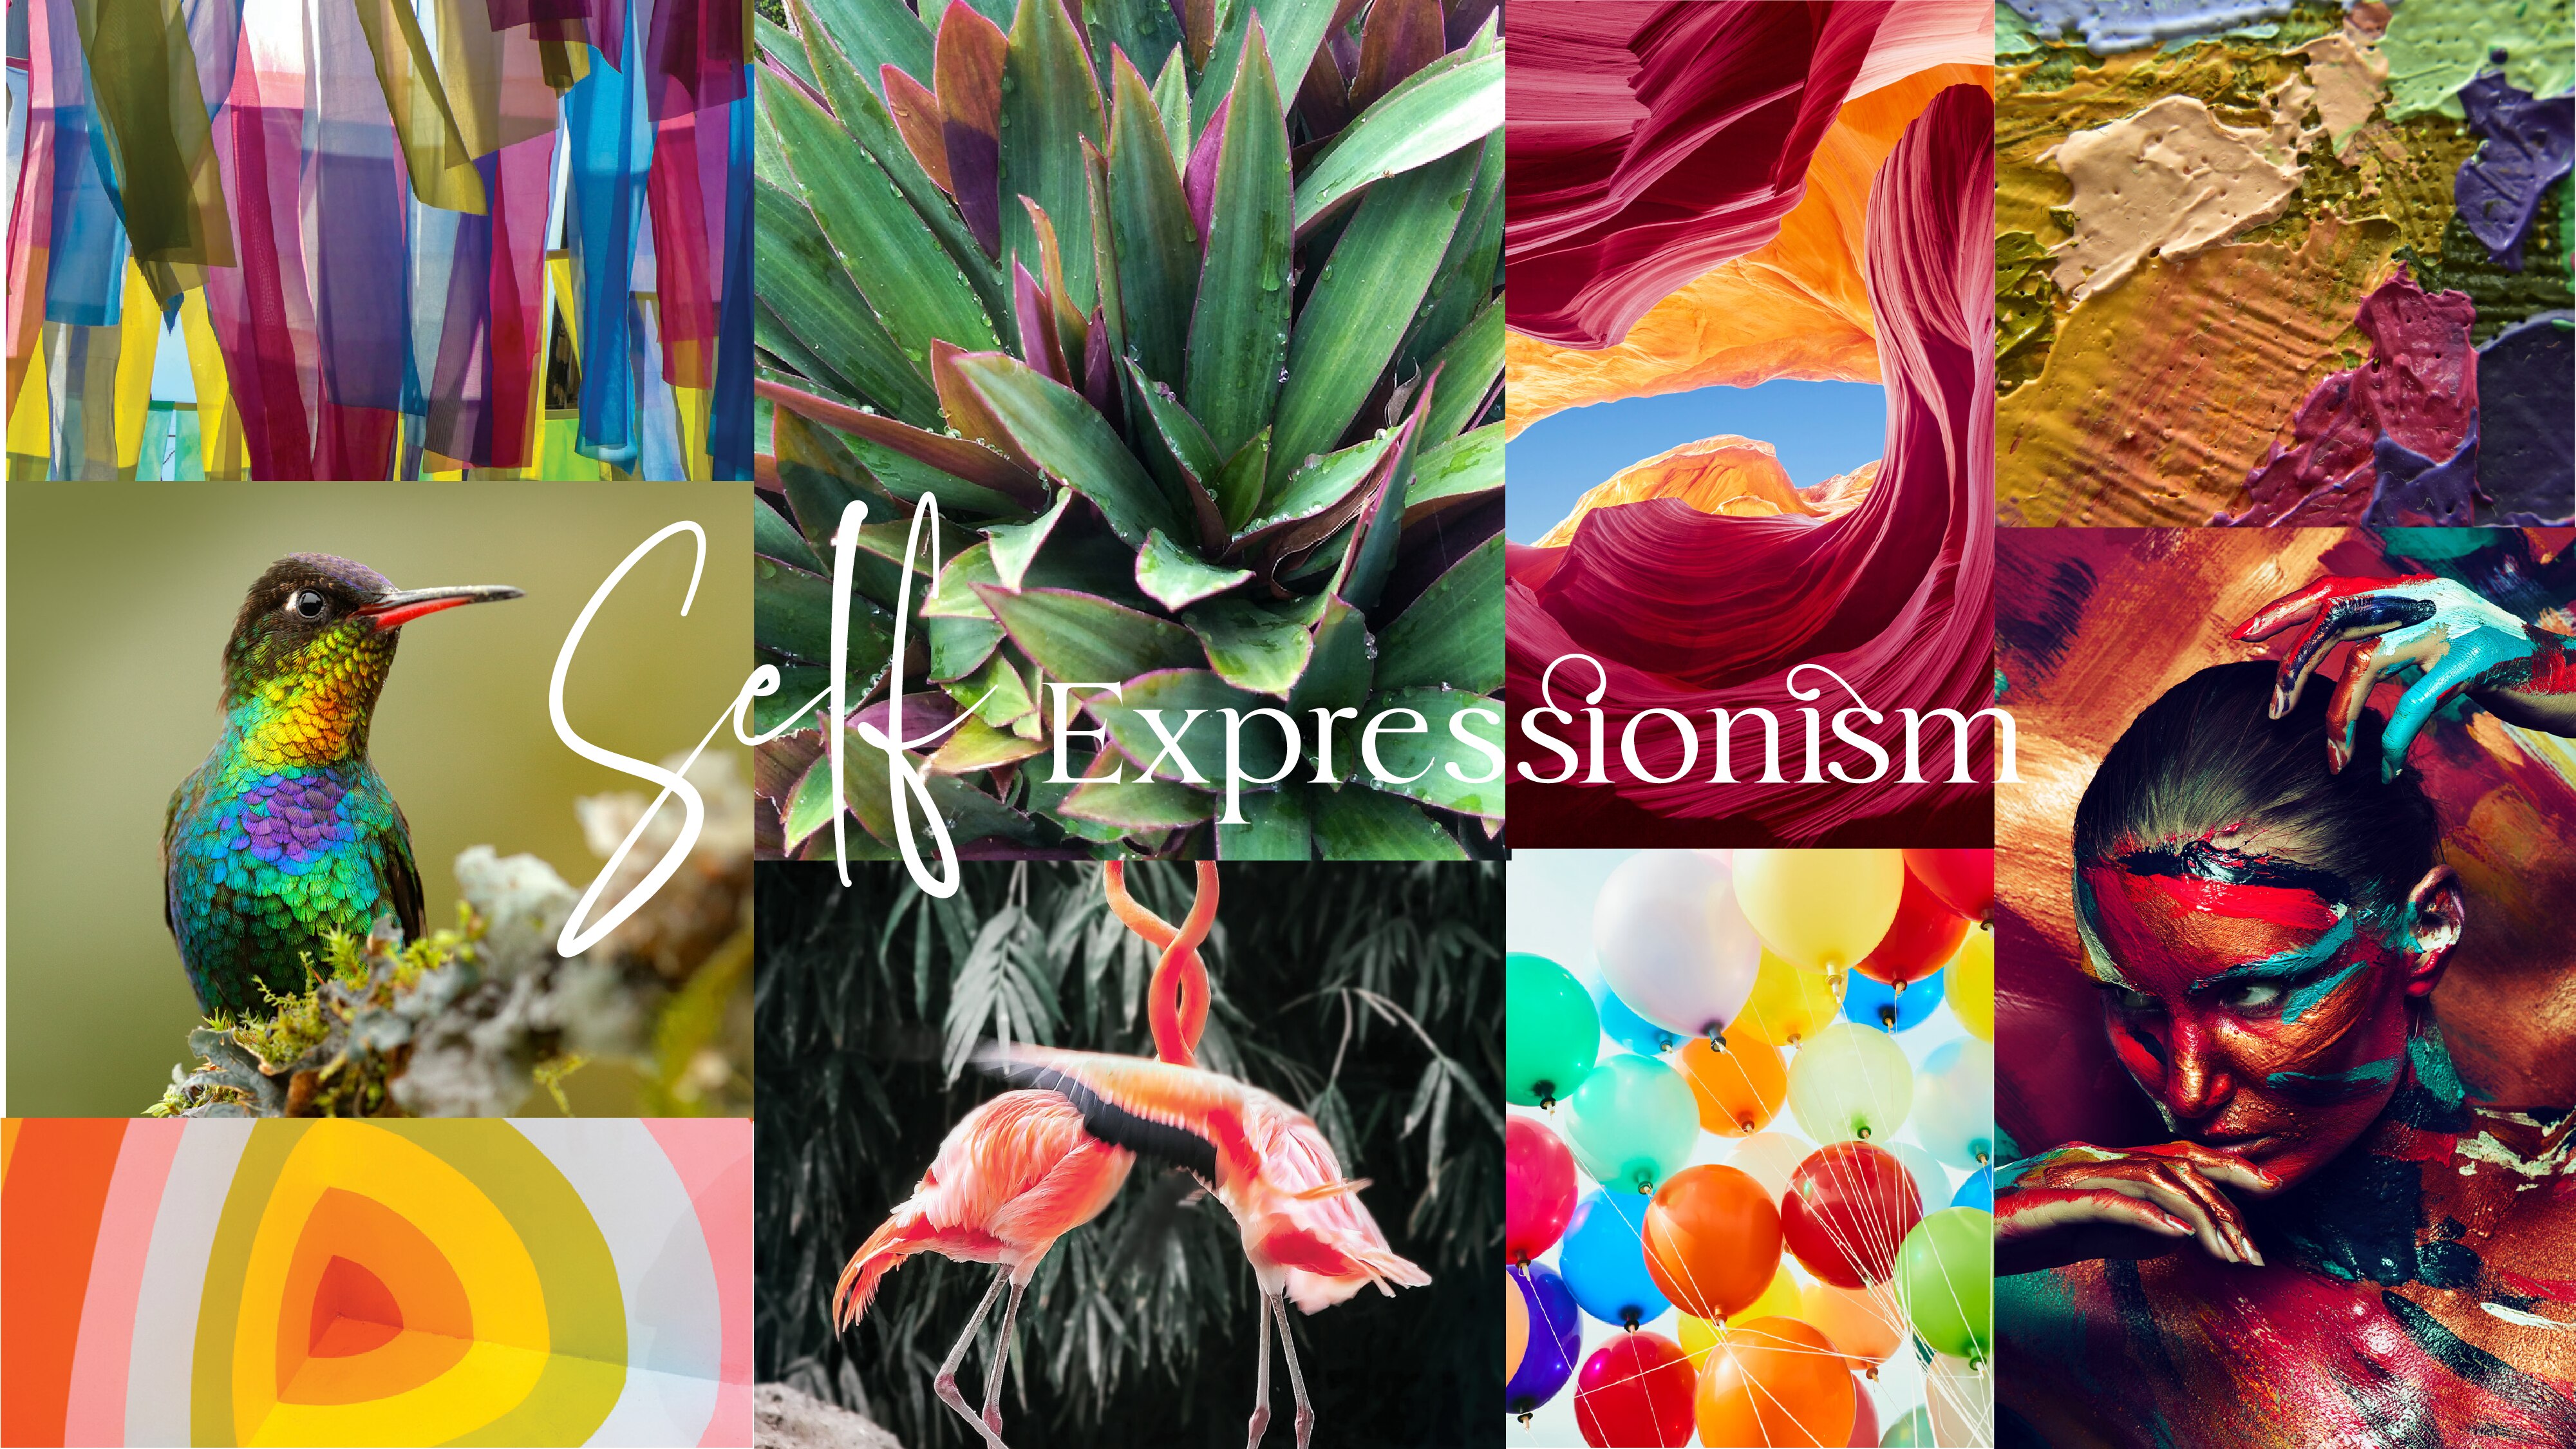 MZ_SELF_EXPRESSIONISM_banner.